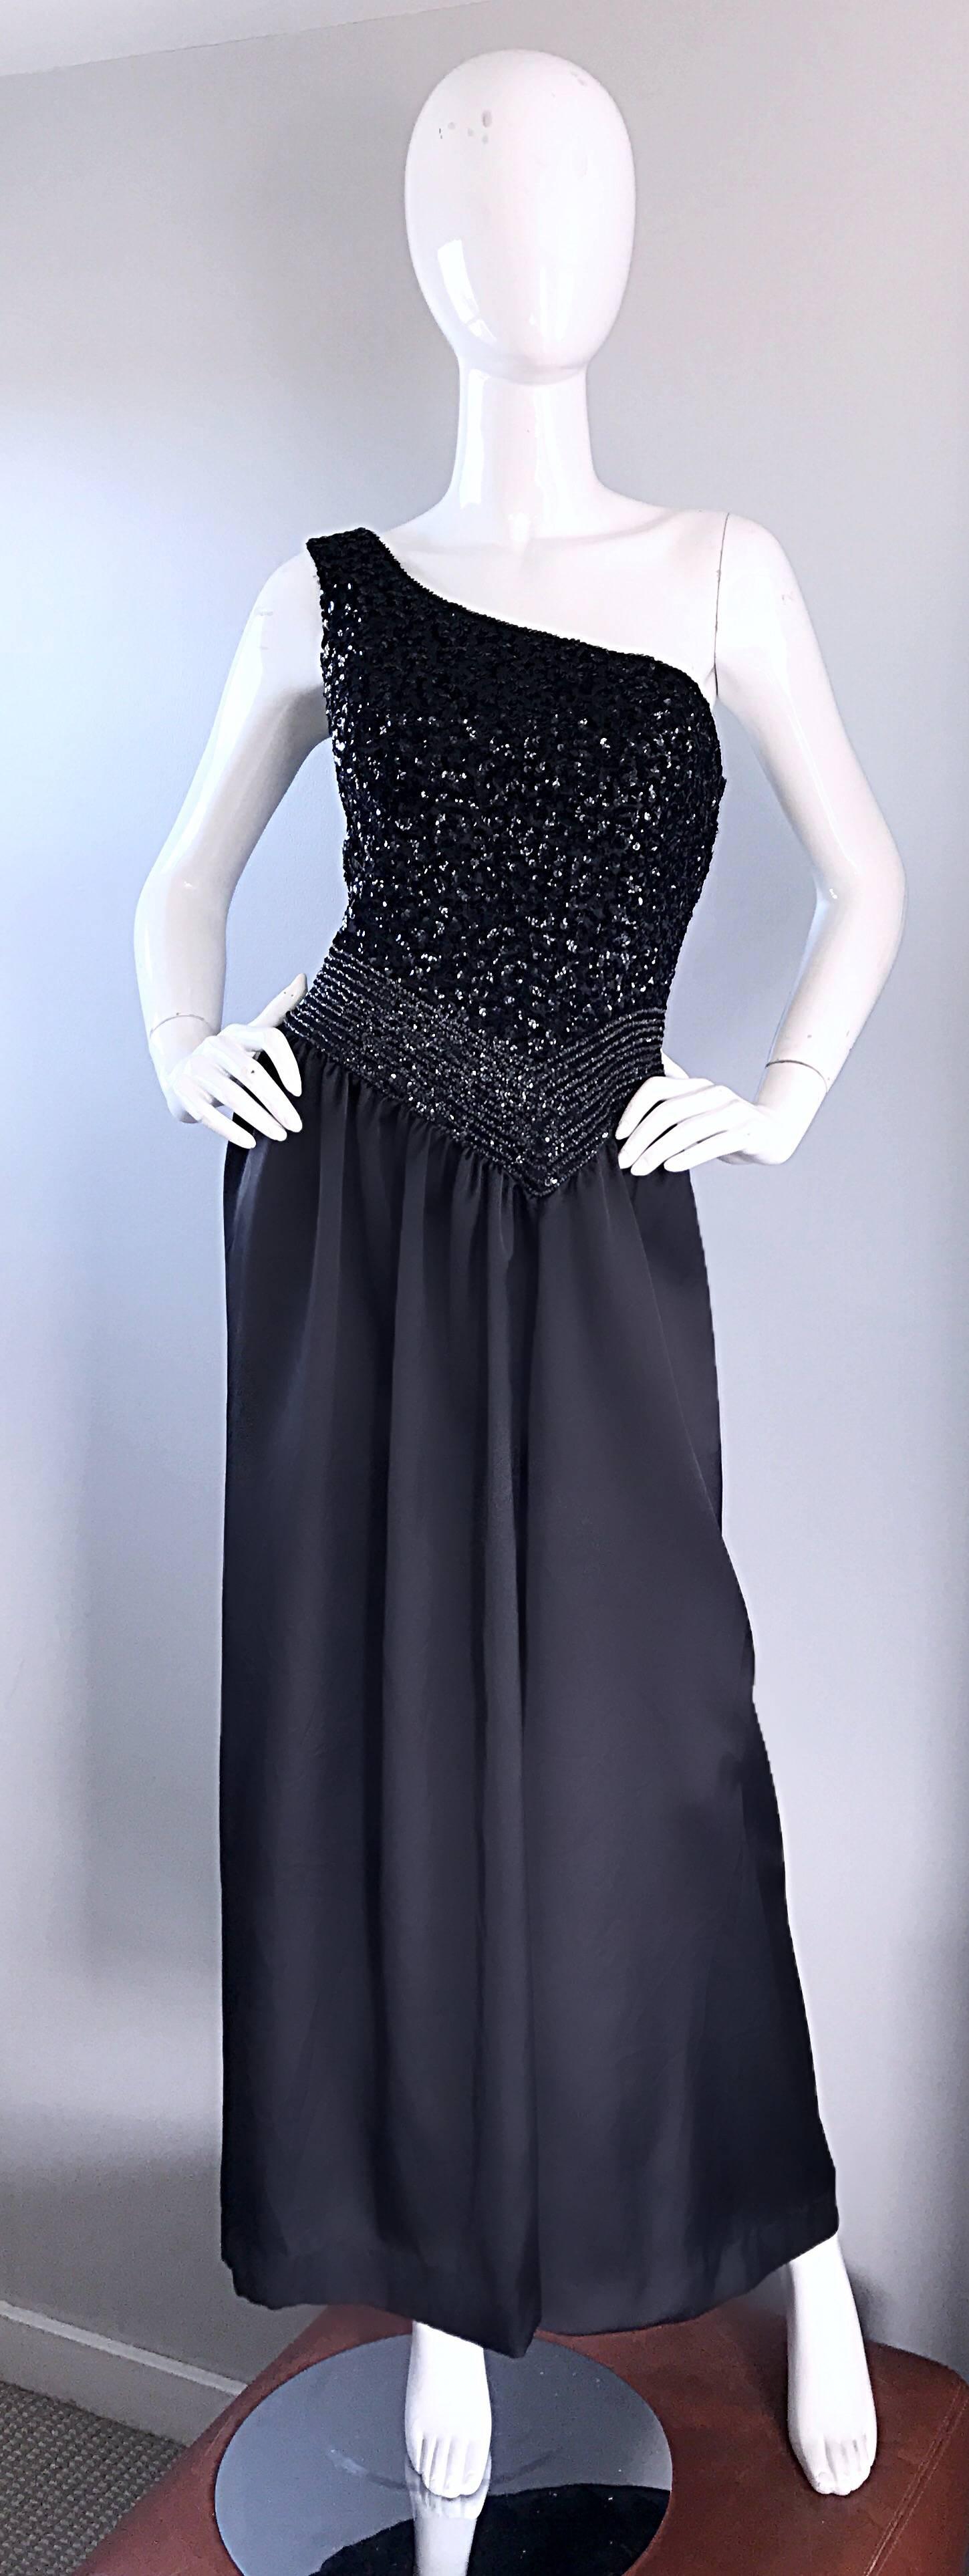 Incredible vintage 1970s one shoulder black sequin silk Grecian inspired Toga evening dress! Features thousands of hand-sewn sequins and beads throughout the entire bodice. Soft black silk skirt flows with movement. Full metal zipper up the side